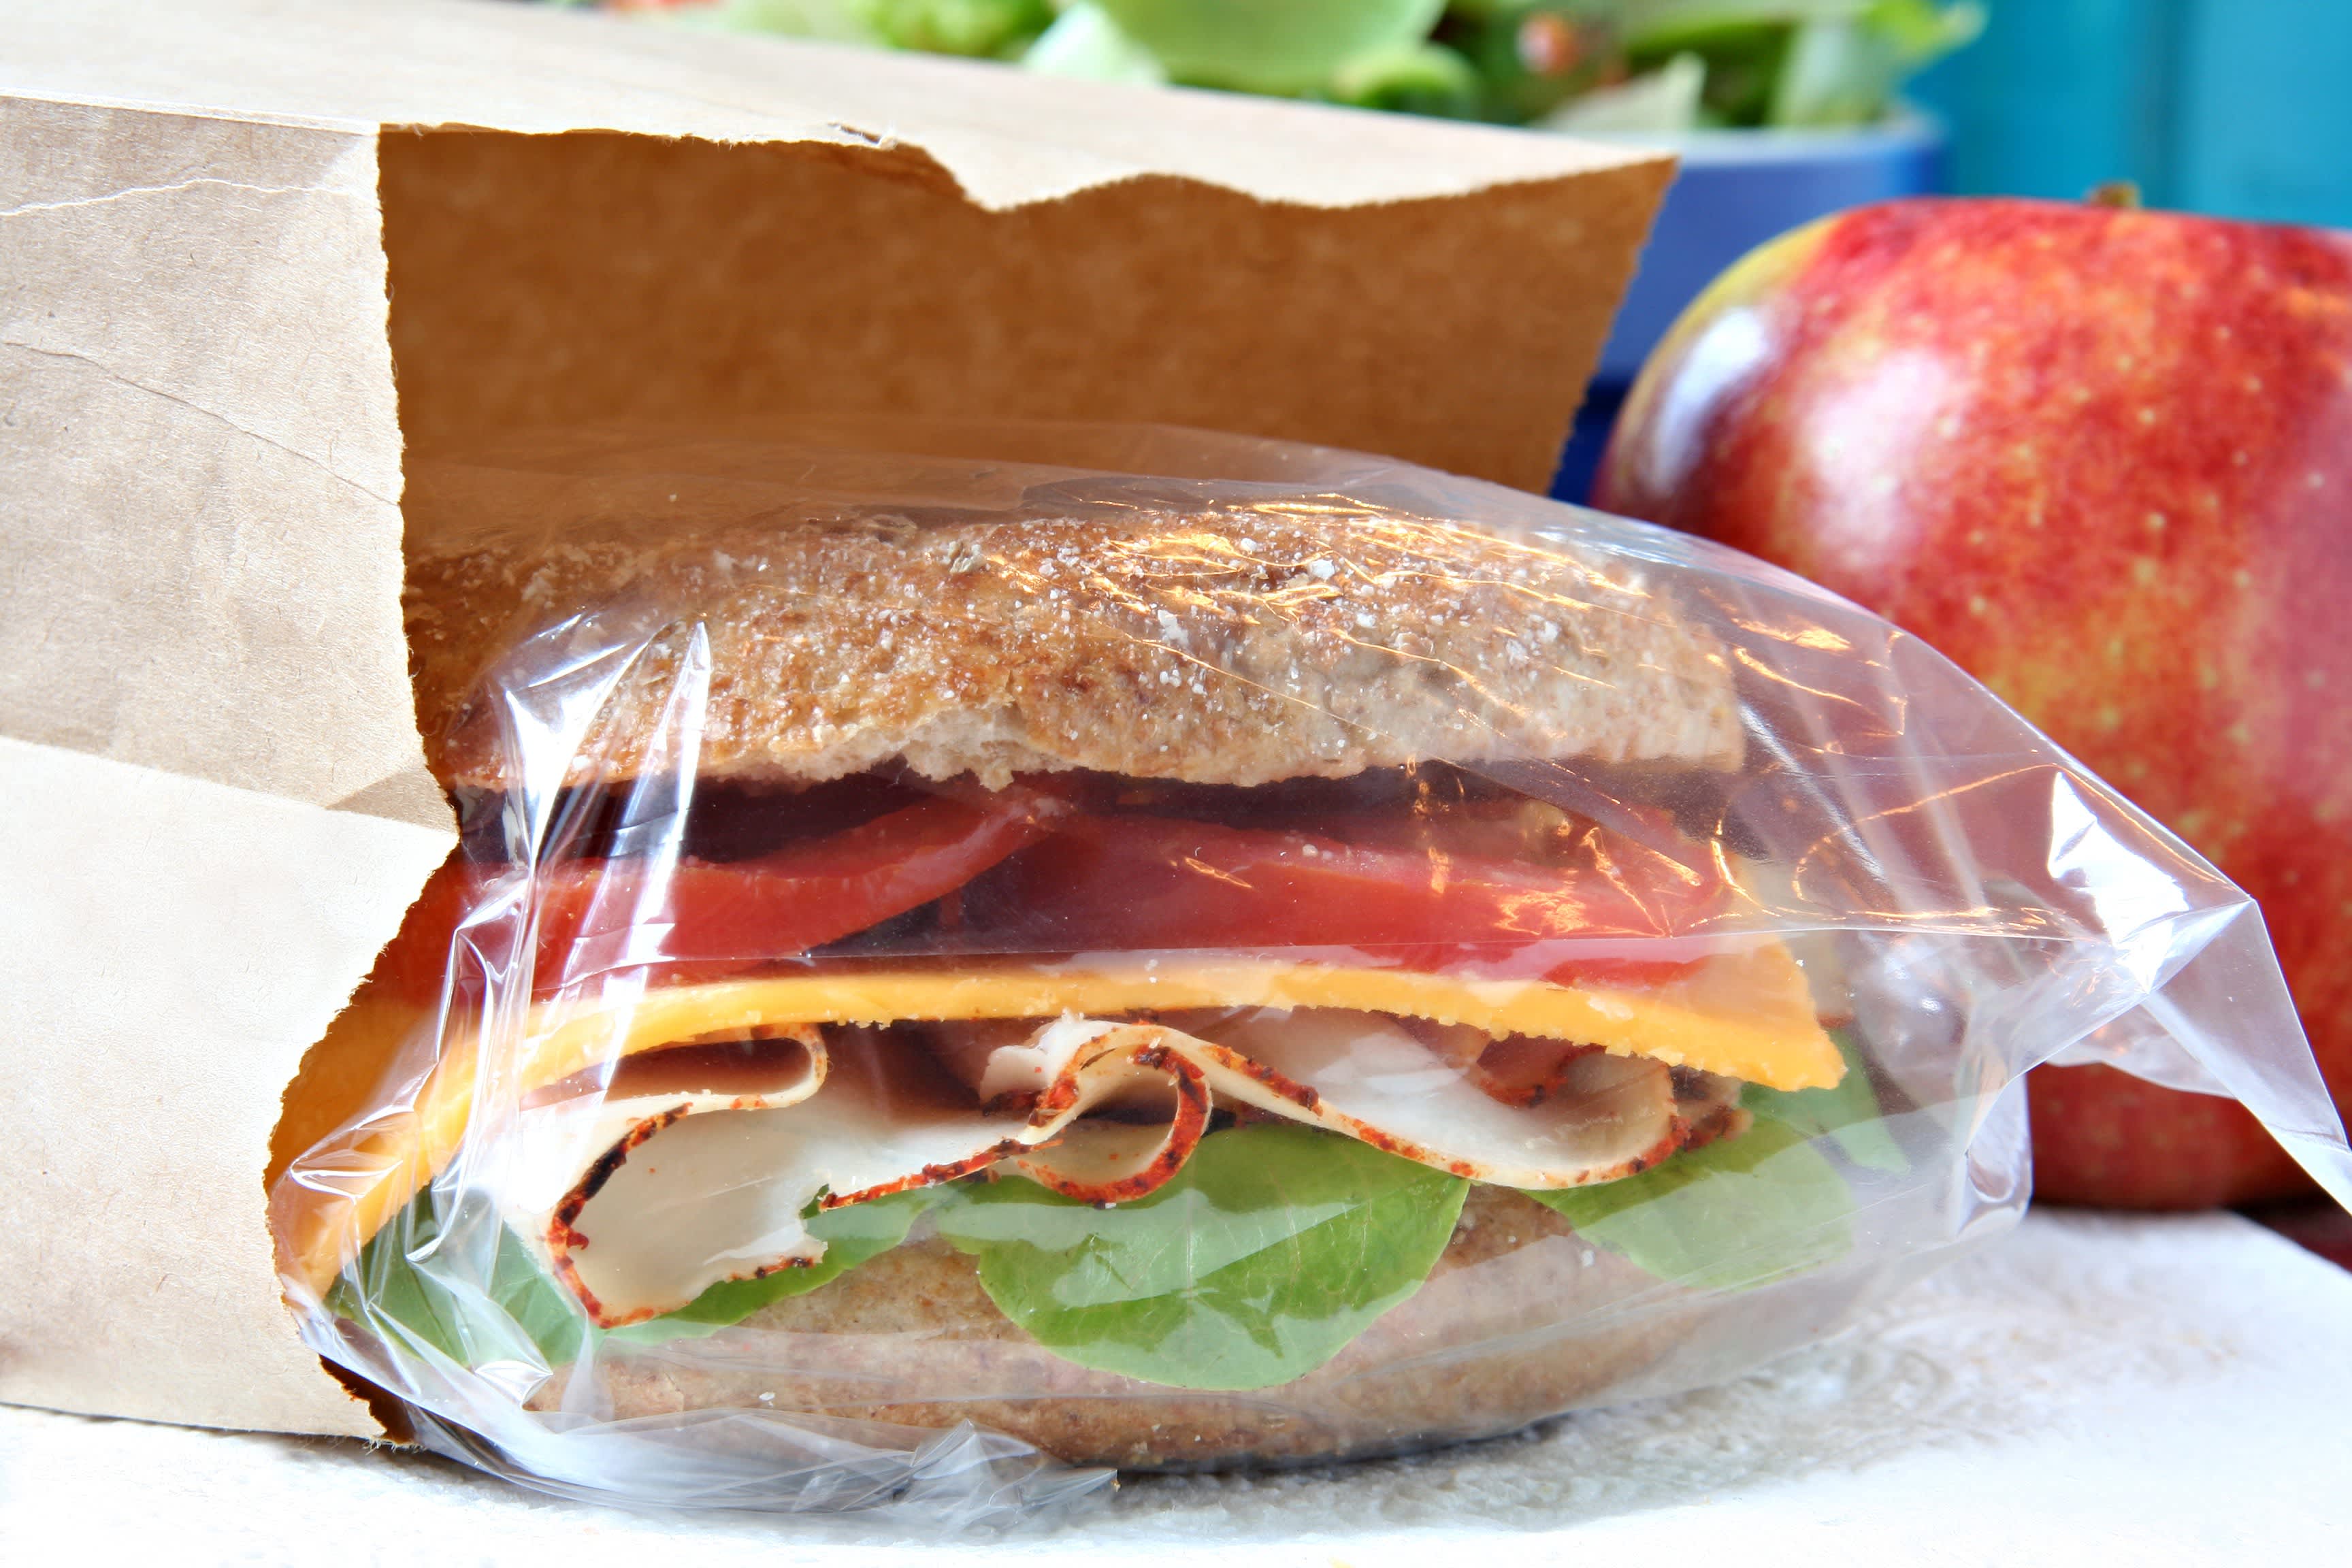 How To Keep Sandwiches From Getting Soggy In Lunch Box